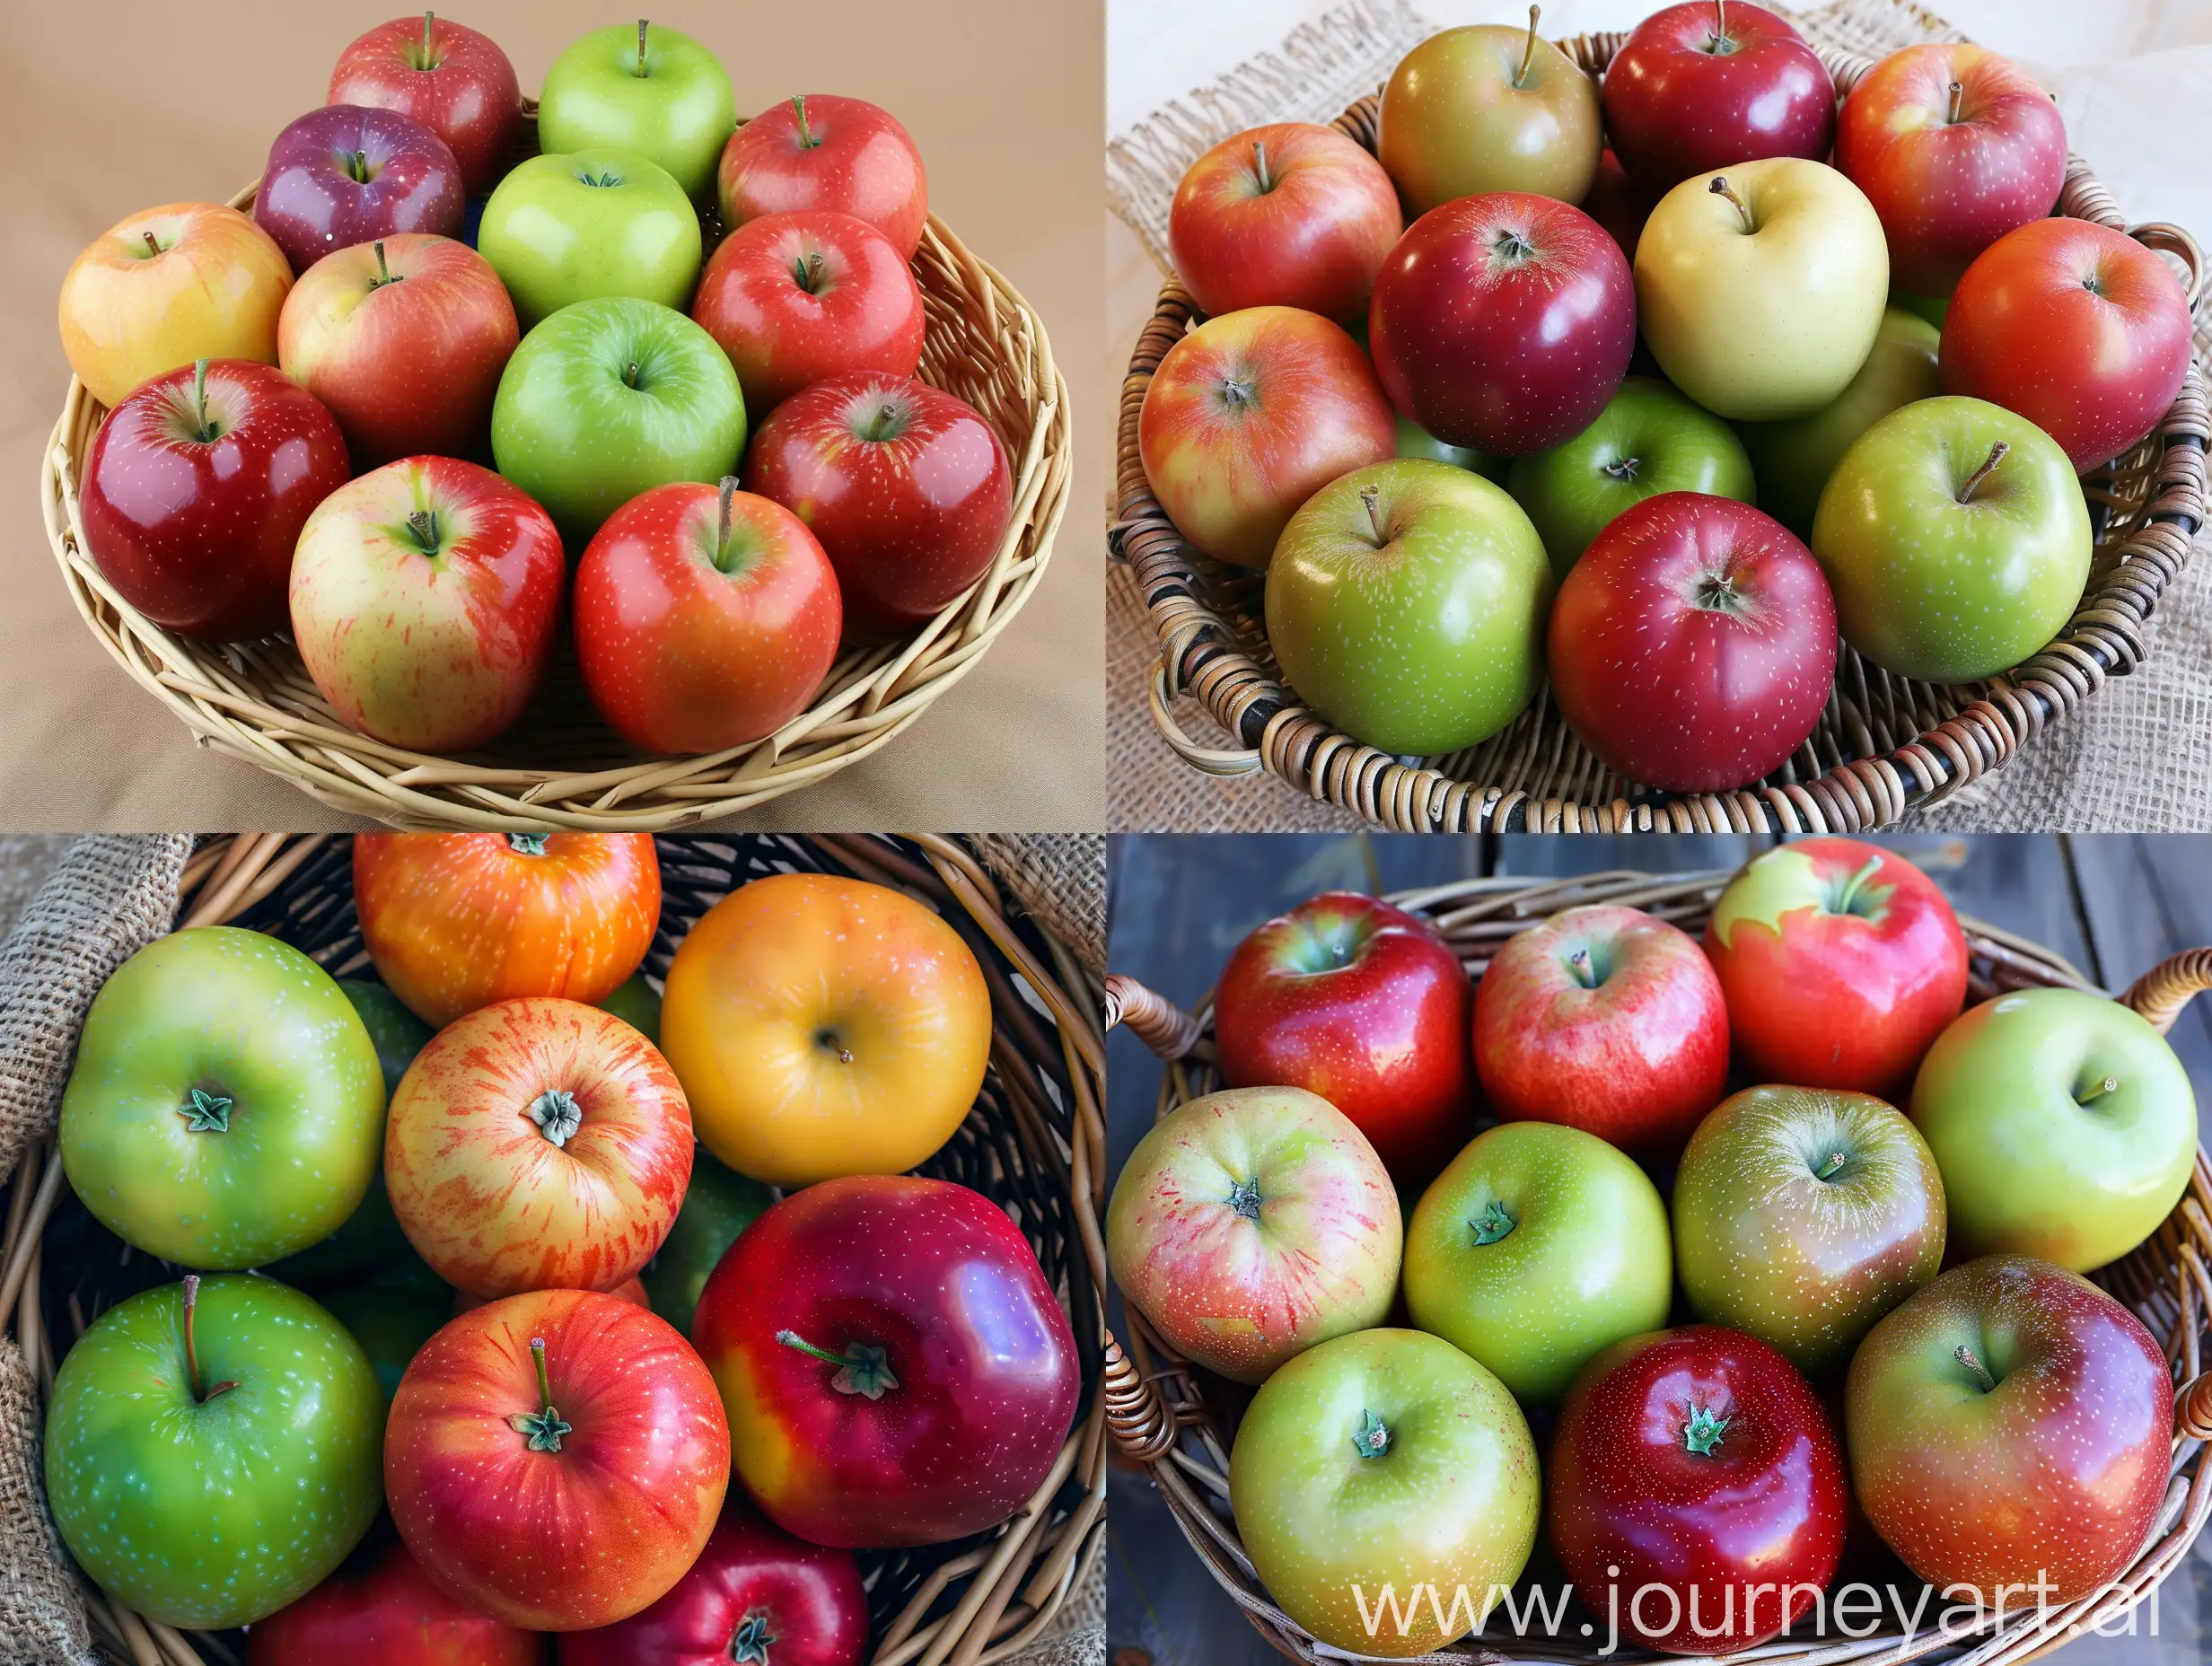 Real photo of a basket of apples of different colors